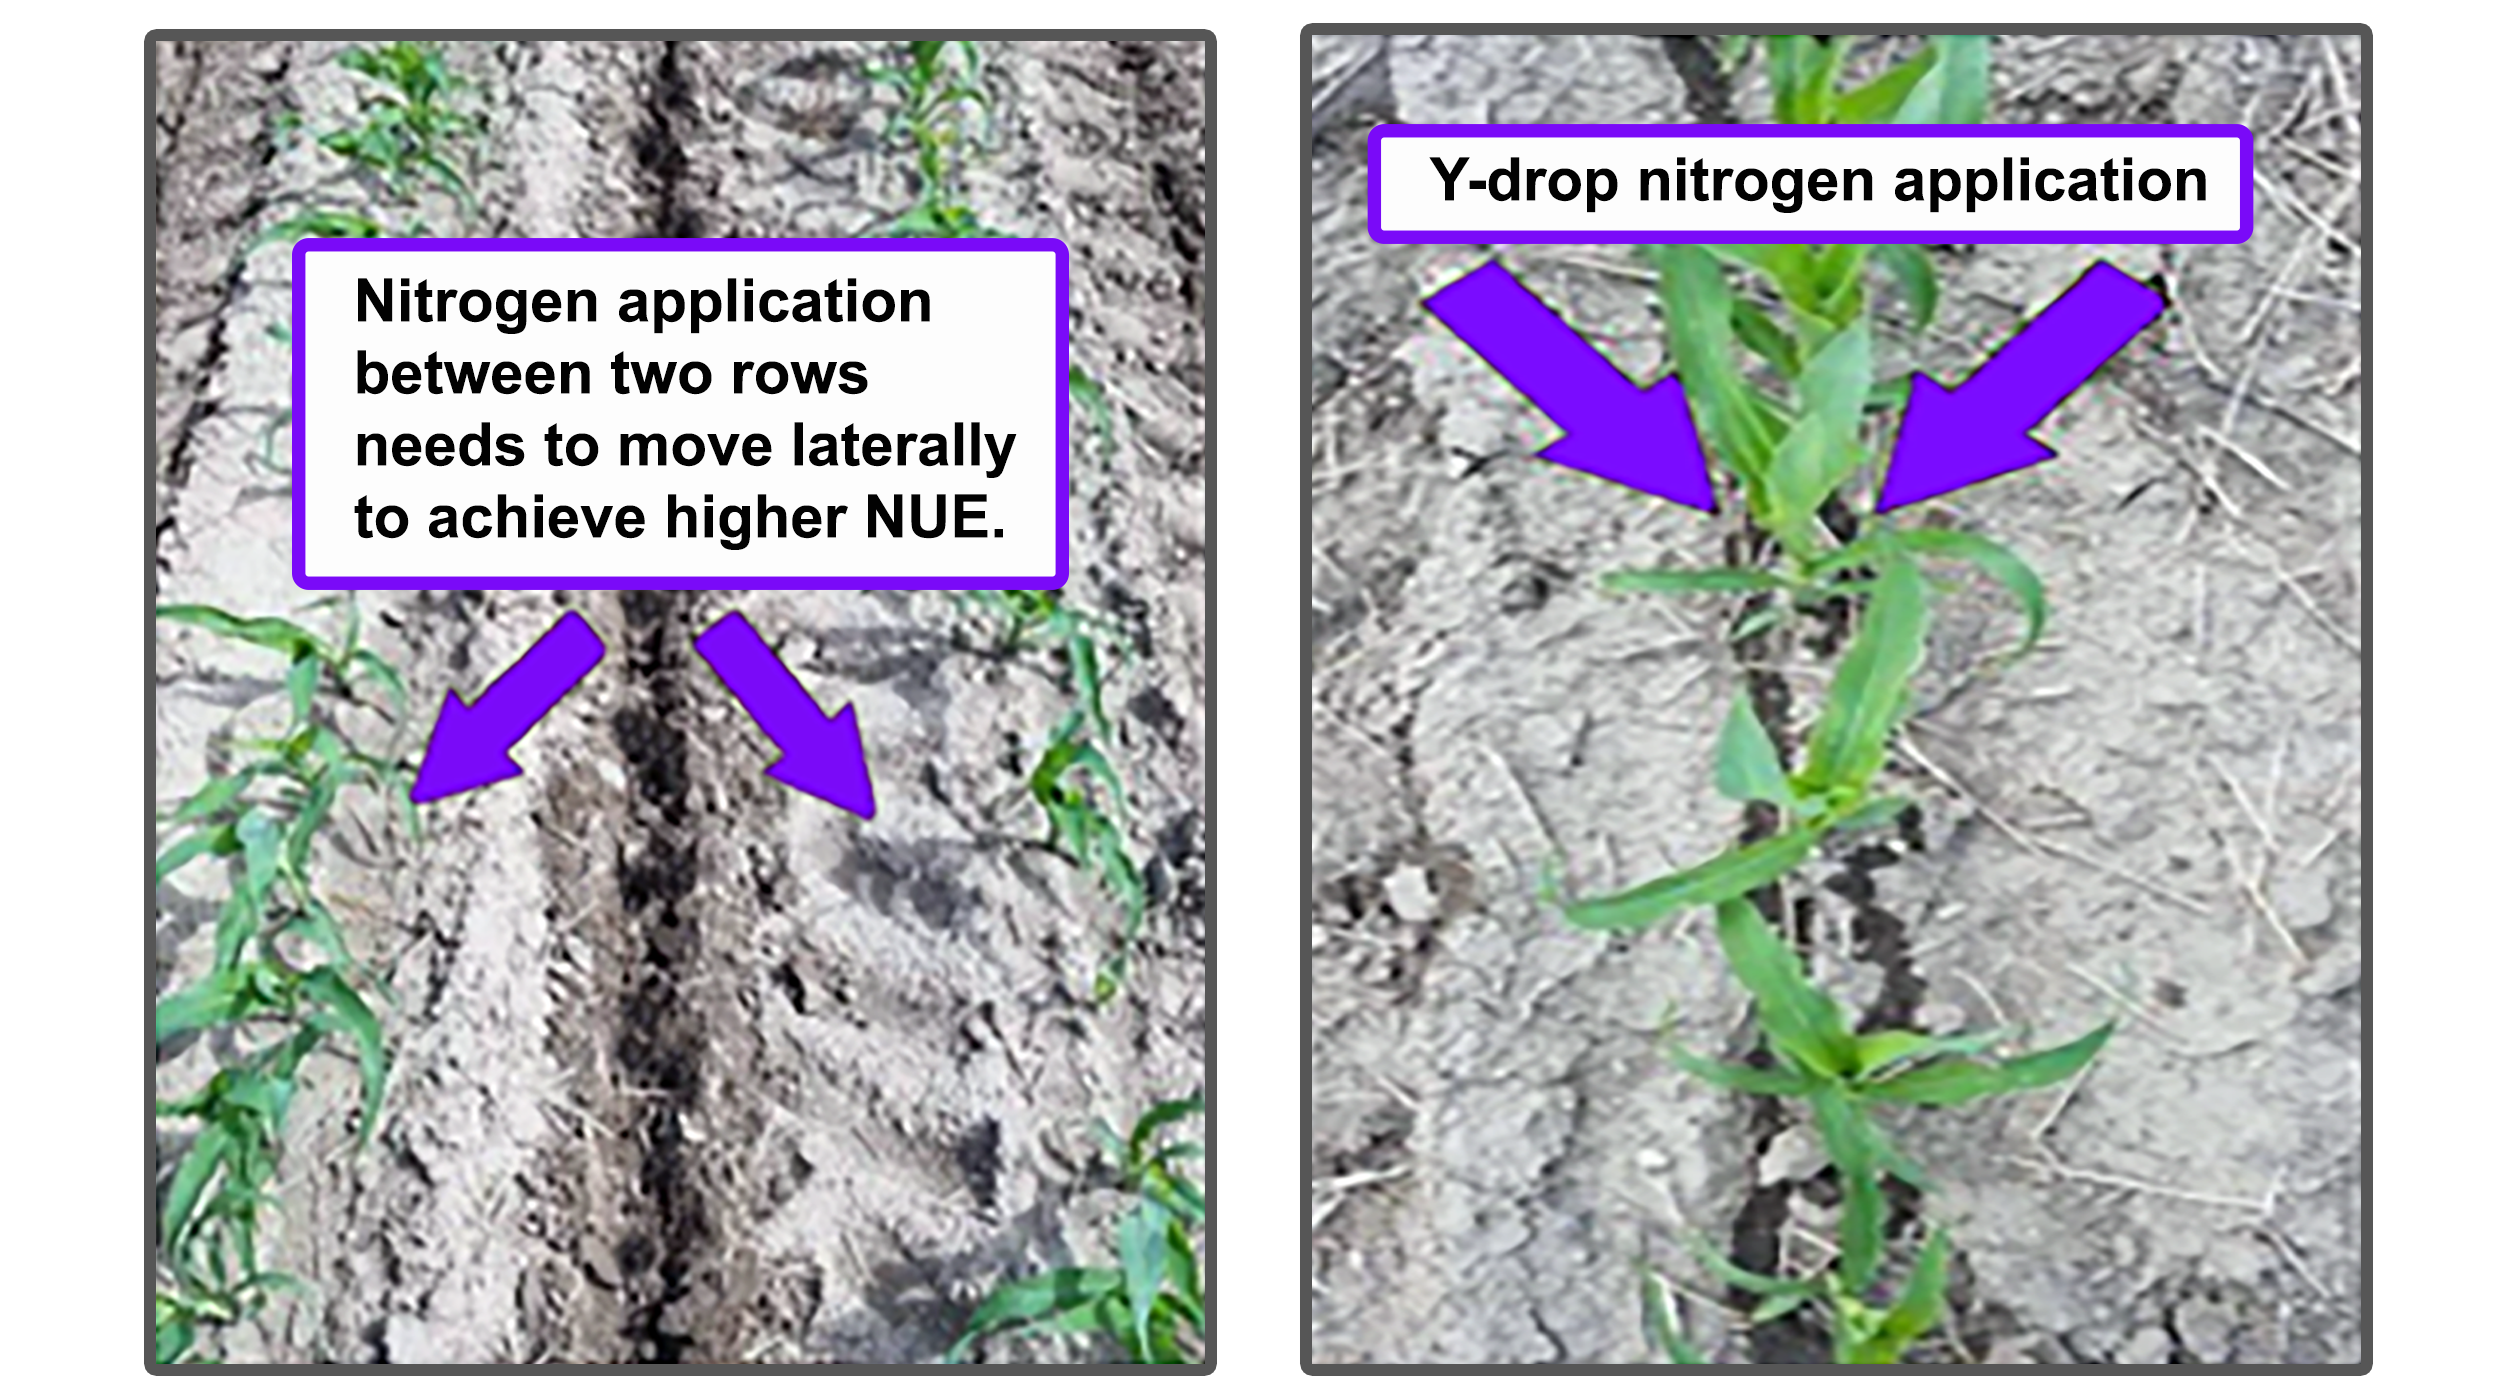 Two fields with different methods of nitrogen application. The first application is between the rows of growing crops. The second shows a y-drop application close to the row of crops resulting in optimal application. For assistance reading this graphic and data set, please call SDSU Extension at 605-688-4792.